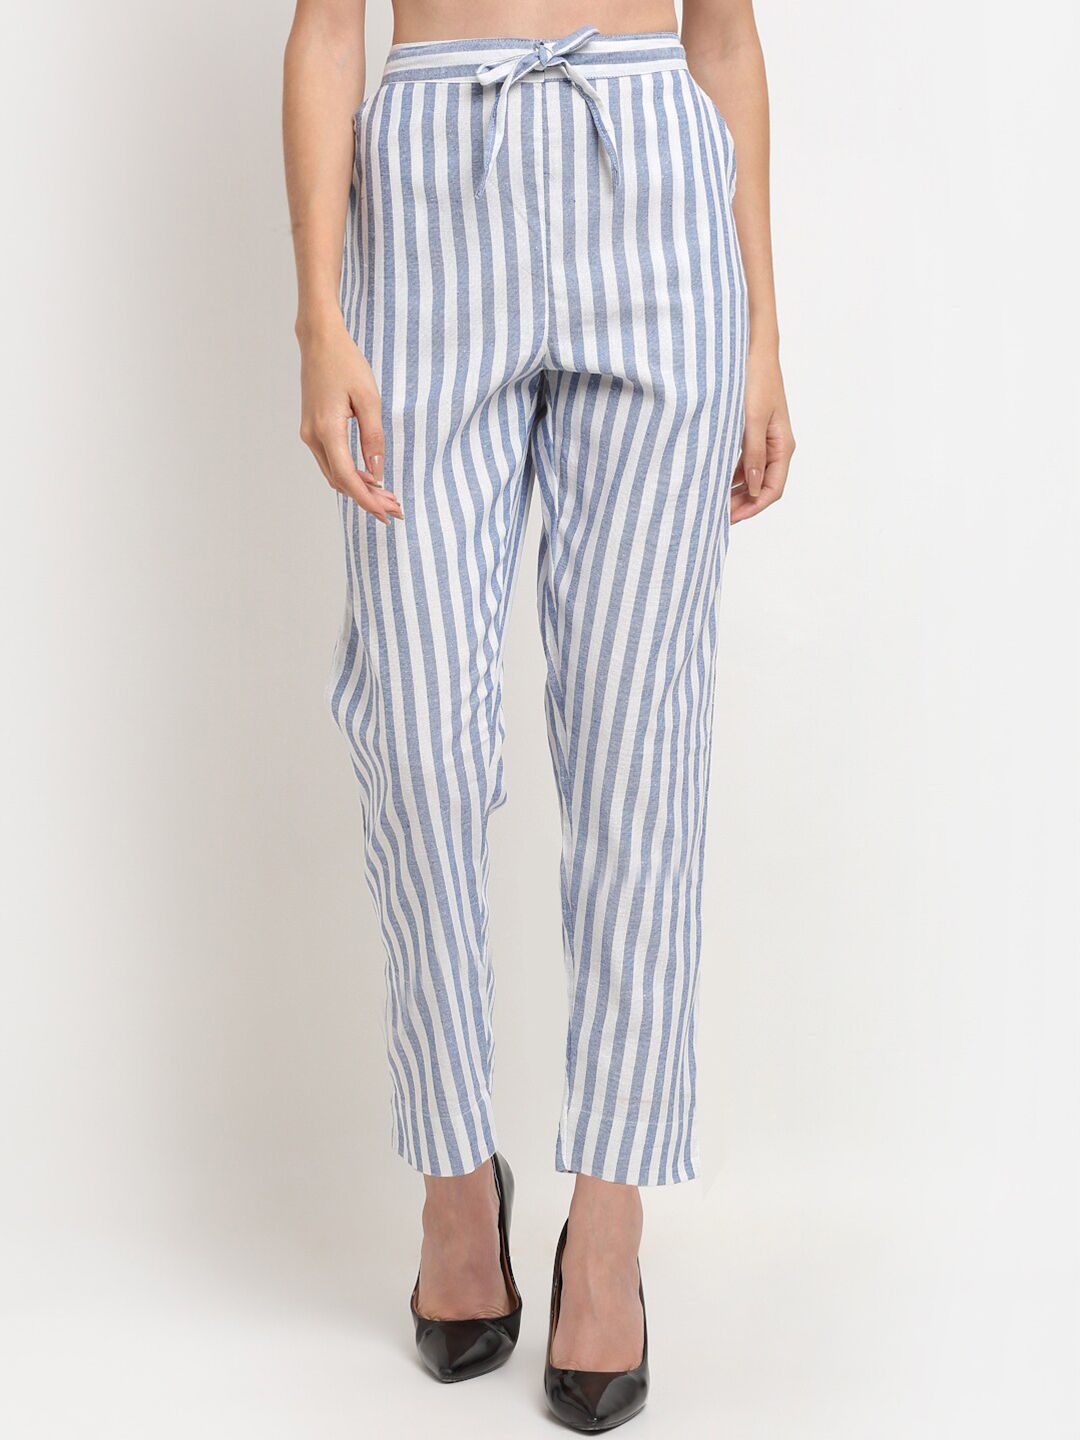 TAG 7 Women Blue & White Striped Cotton Trousers Price in India